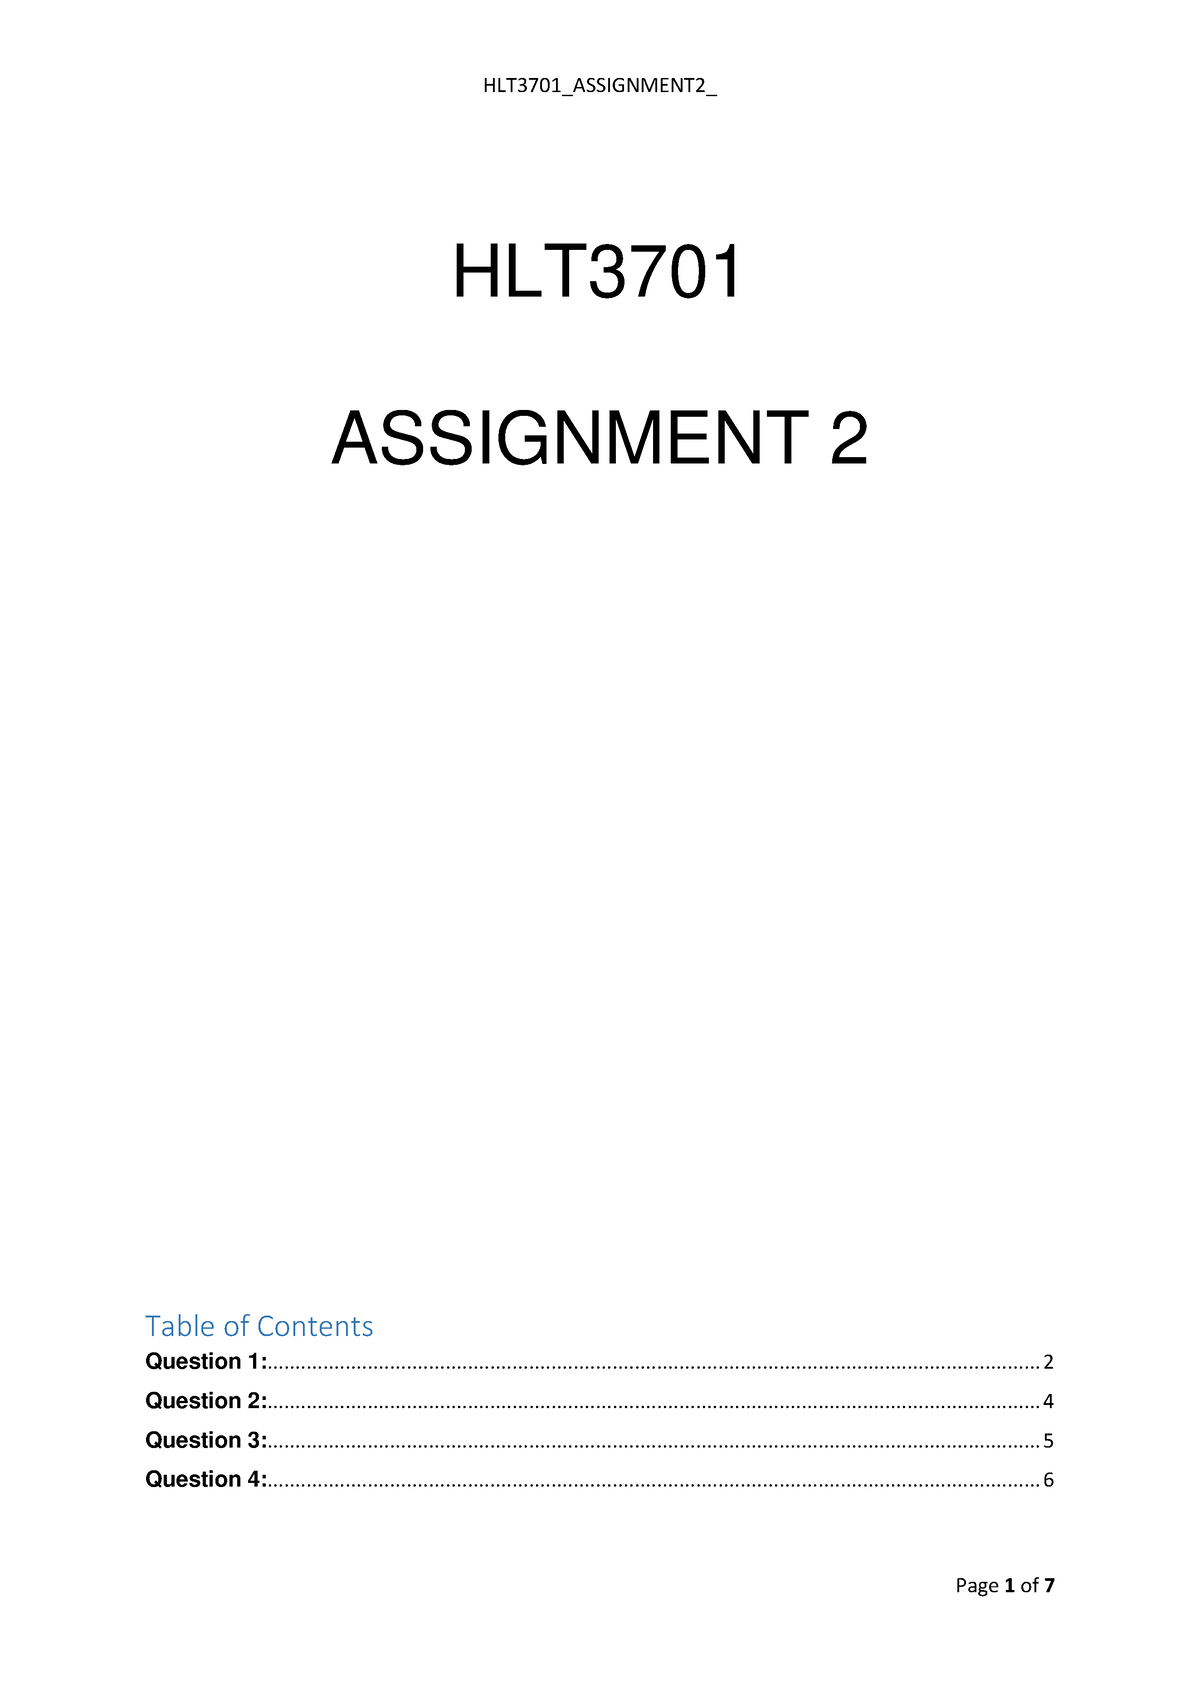 hlt3701 assignment 3 answers